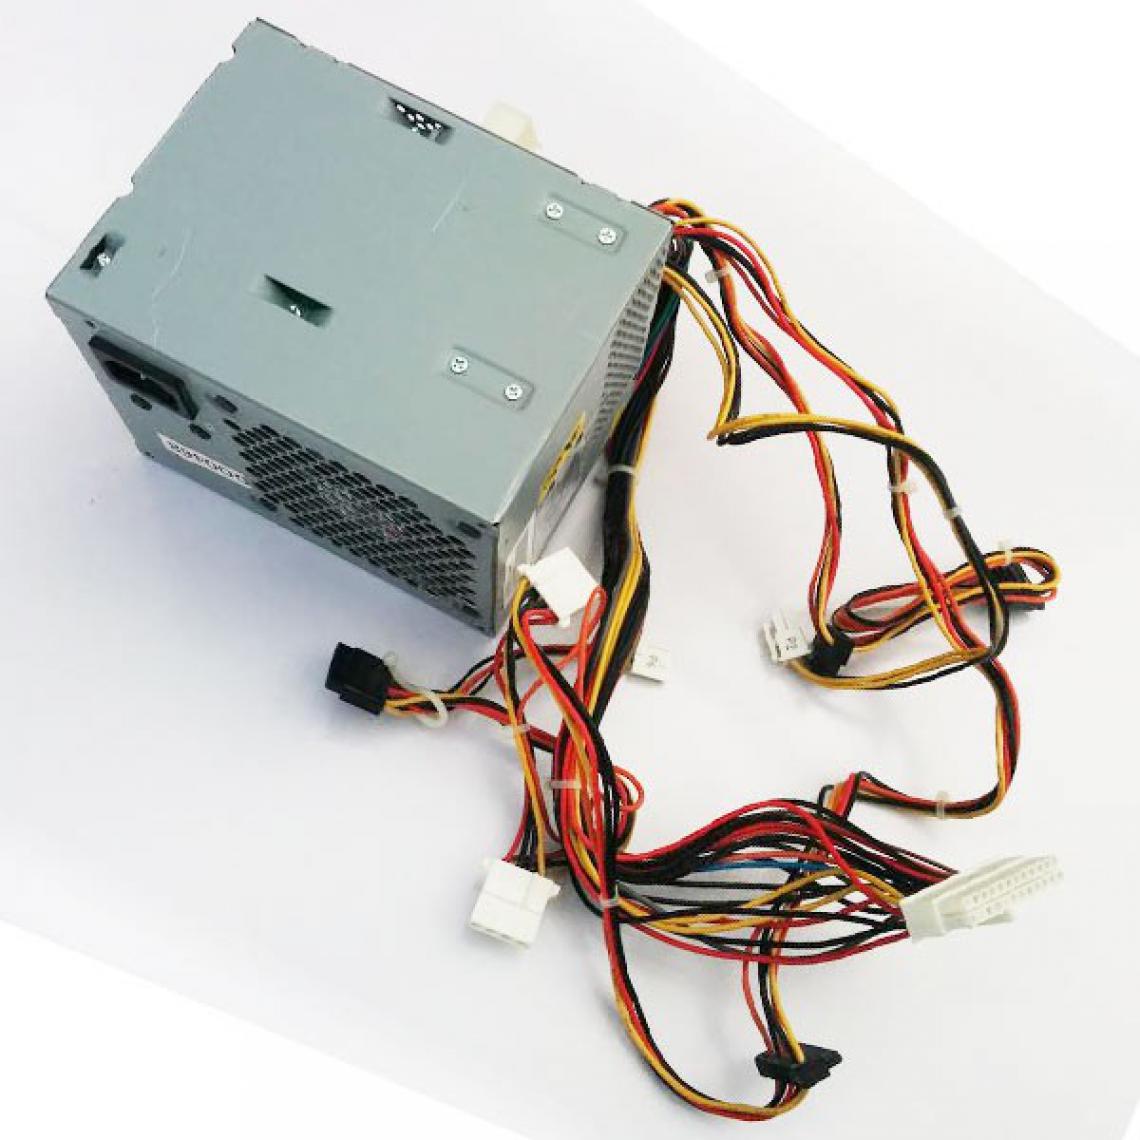 Hipro - Alimentation HIPRO HP-A3108F3P Rev 2 310W 24R2572 IBM Thinkcentre 8142-CTO - Alimentation modulaire